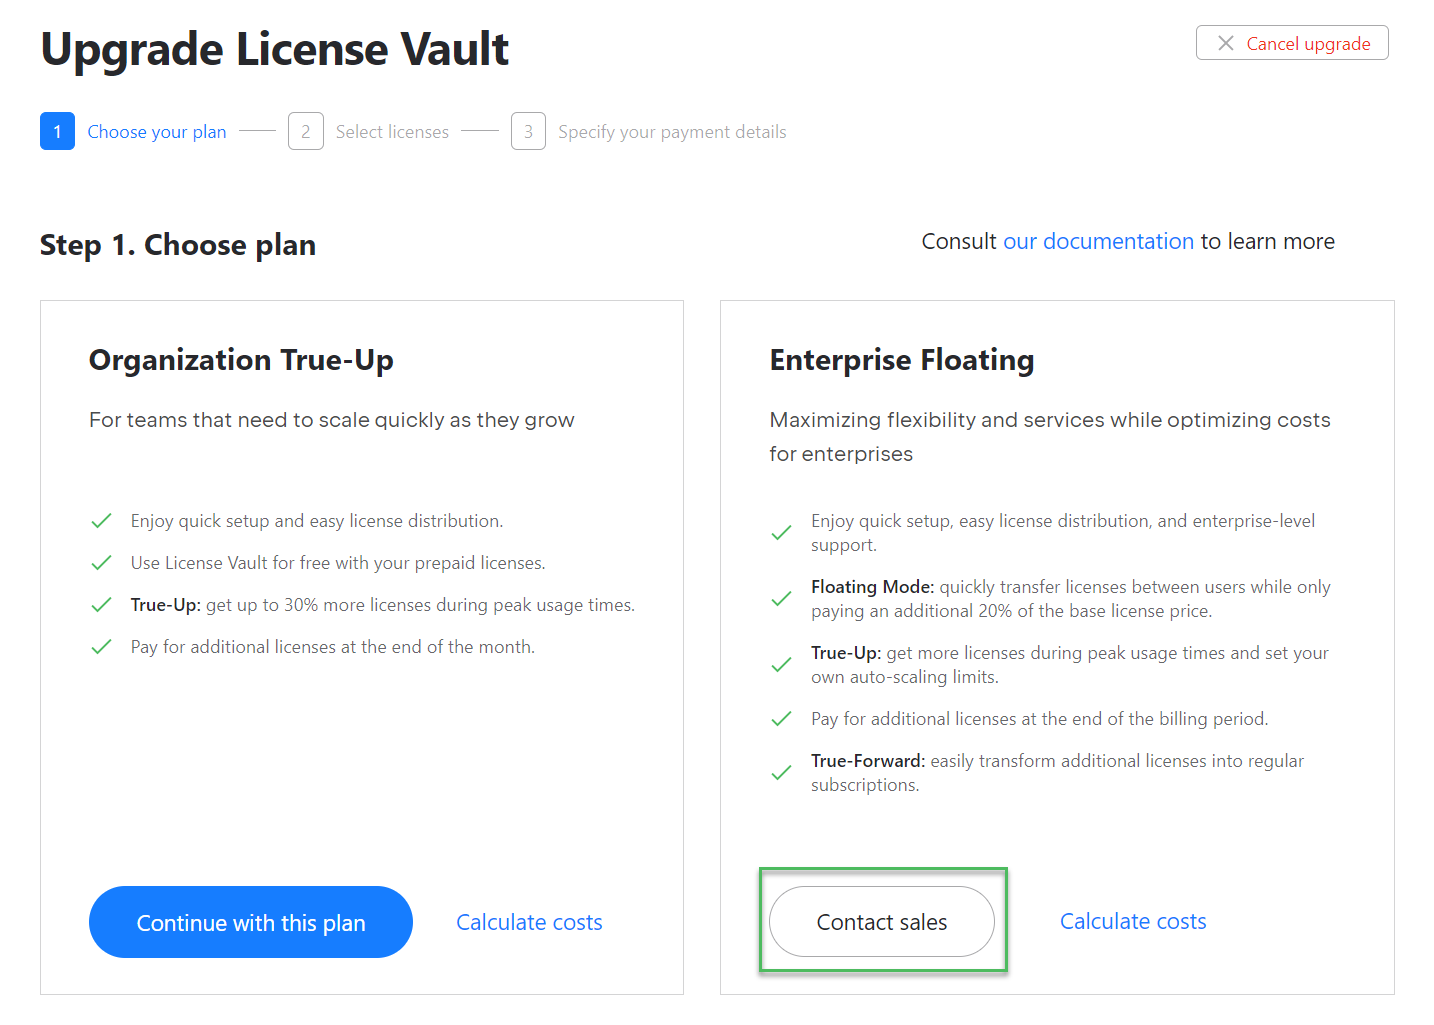 The button to contact sales on the License Vault settings page